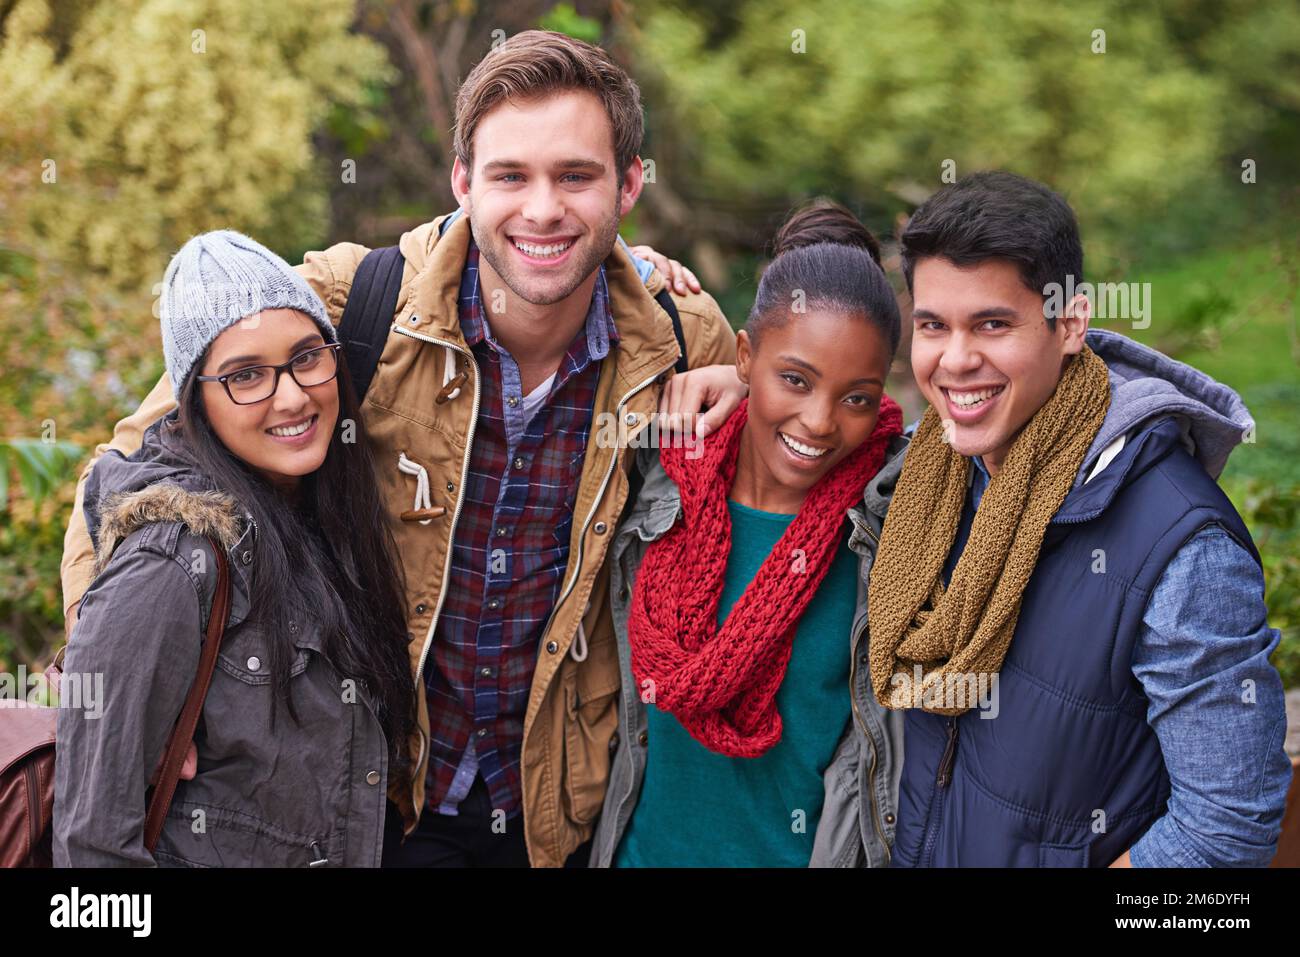 Campus life is great. college students hanging out on campus. Stock Photo